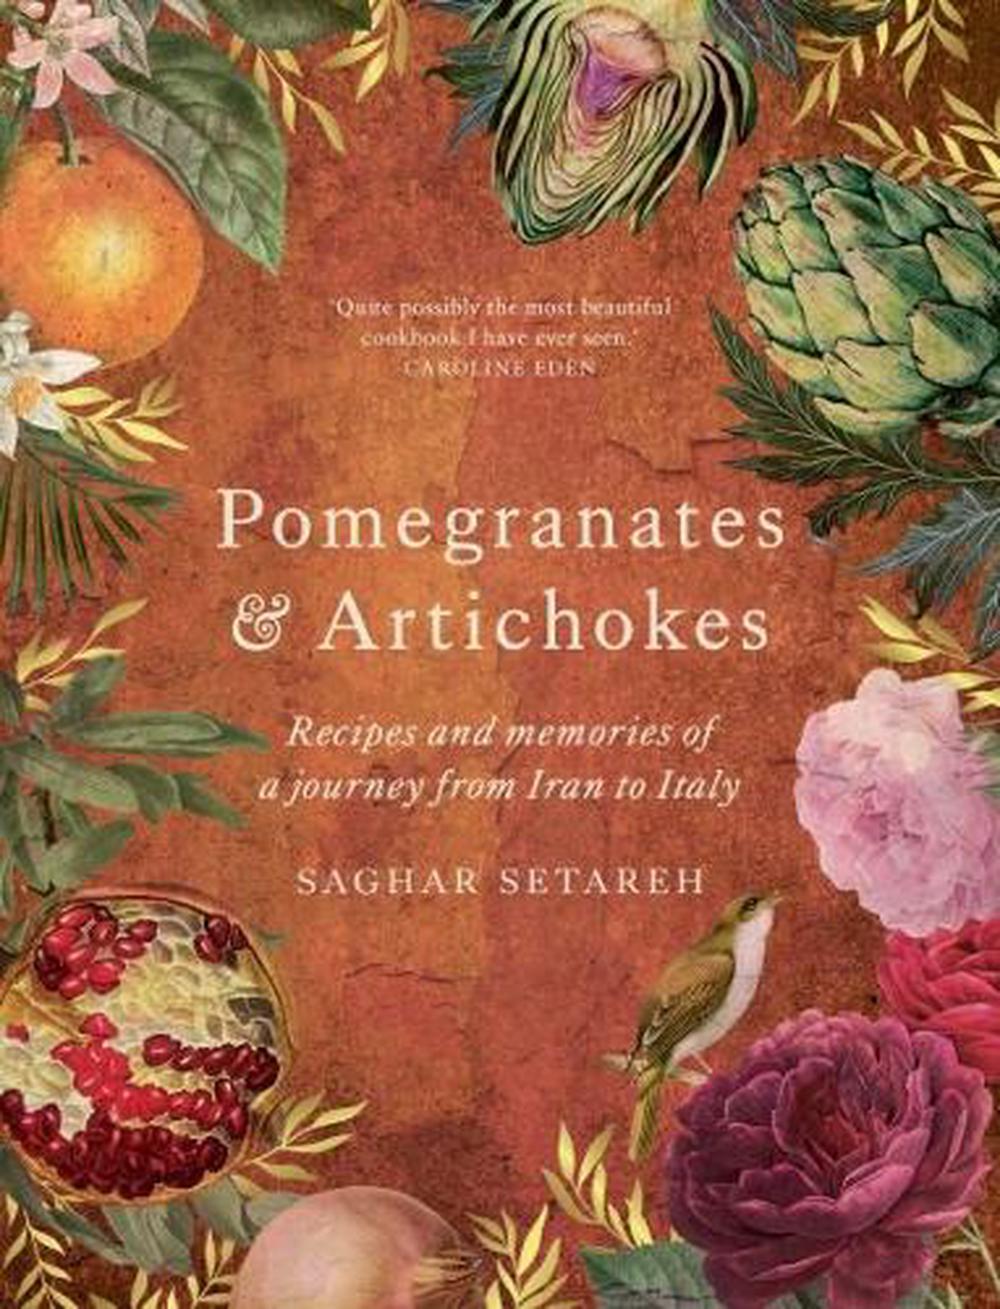 Pomegranates & Artichokes: Recipes and memories of a journey from Iran to Italy | Creeping Fig